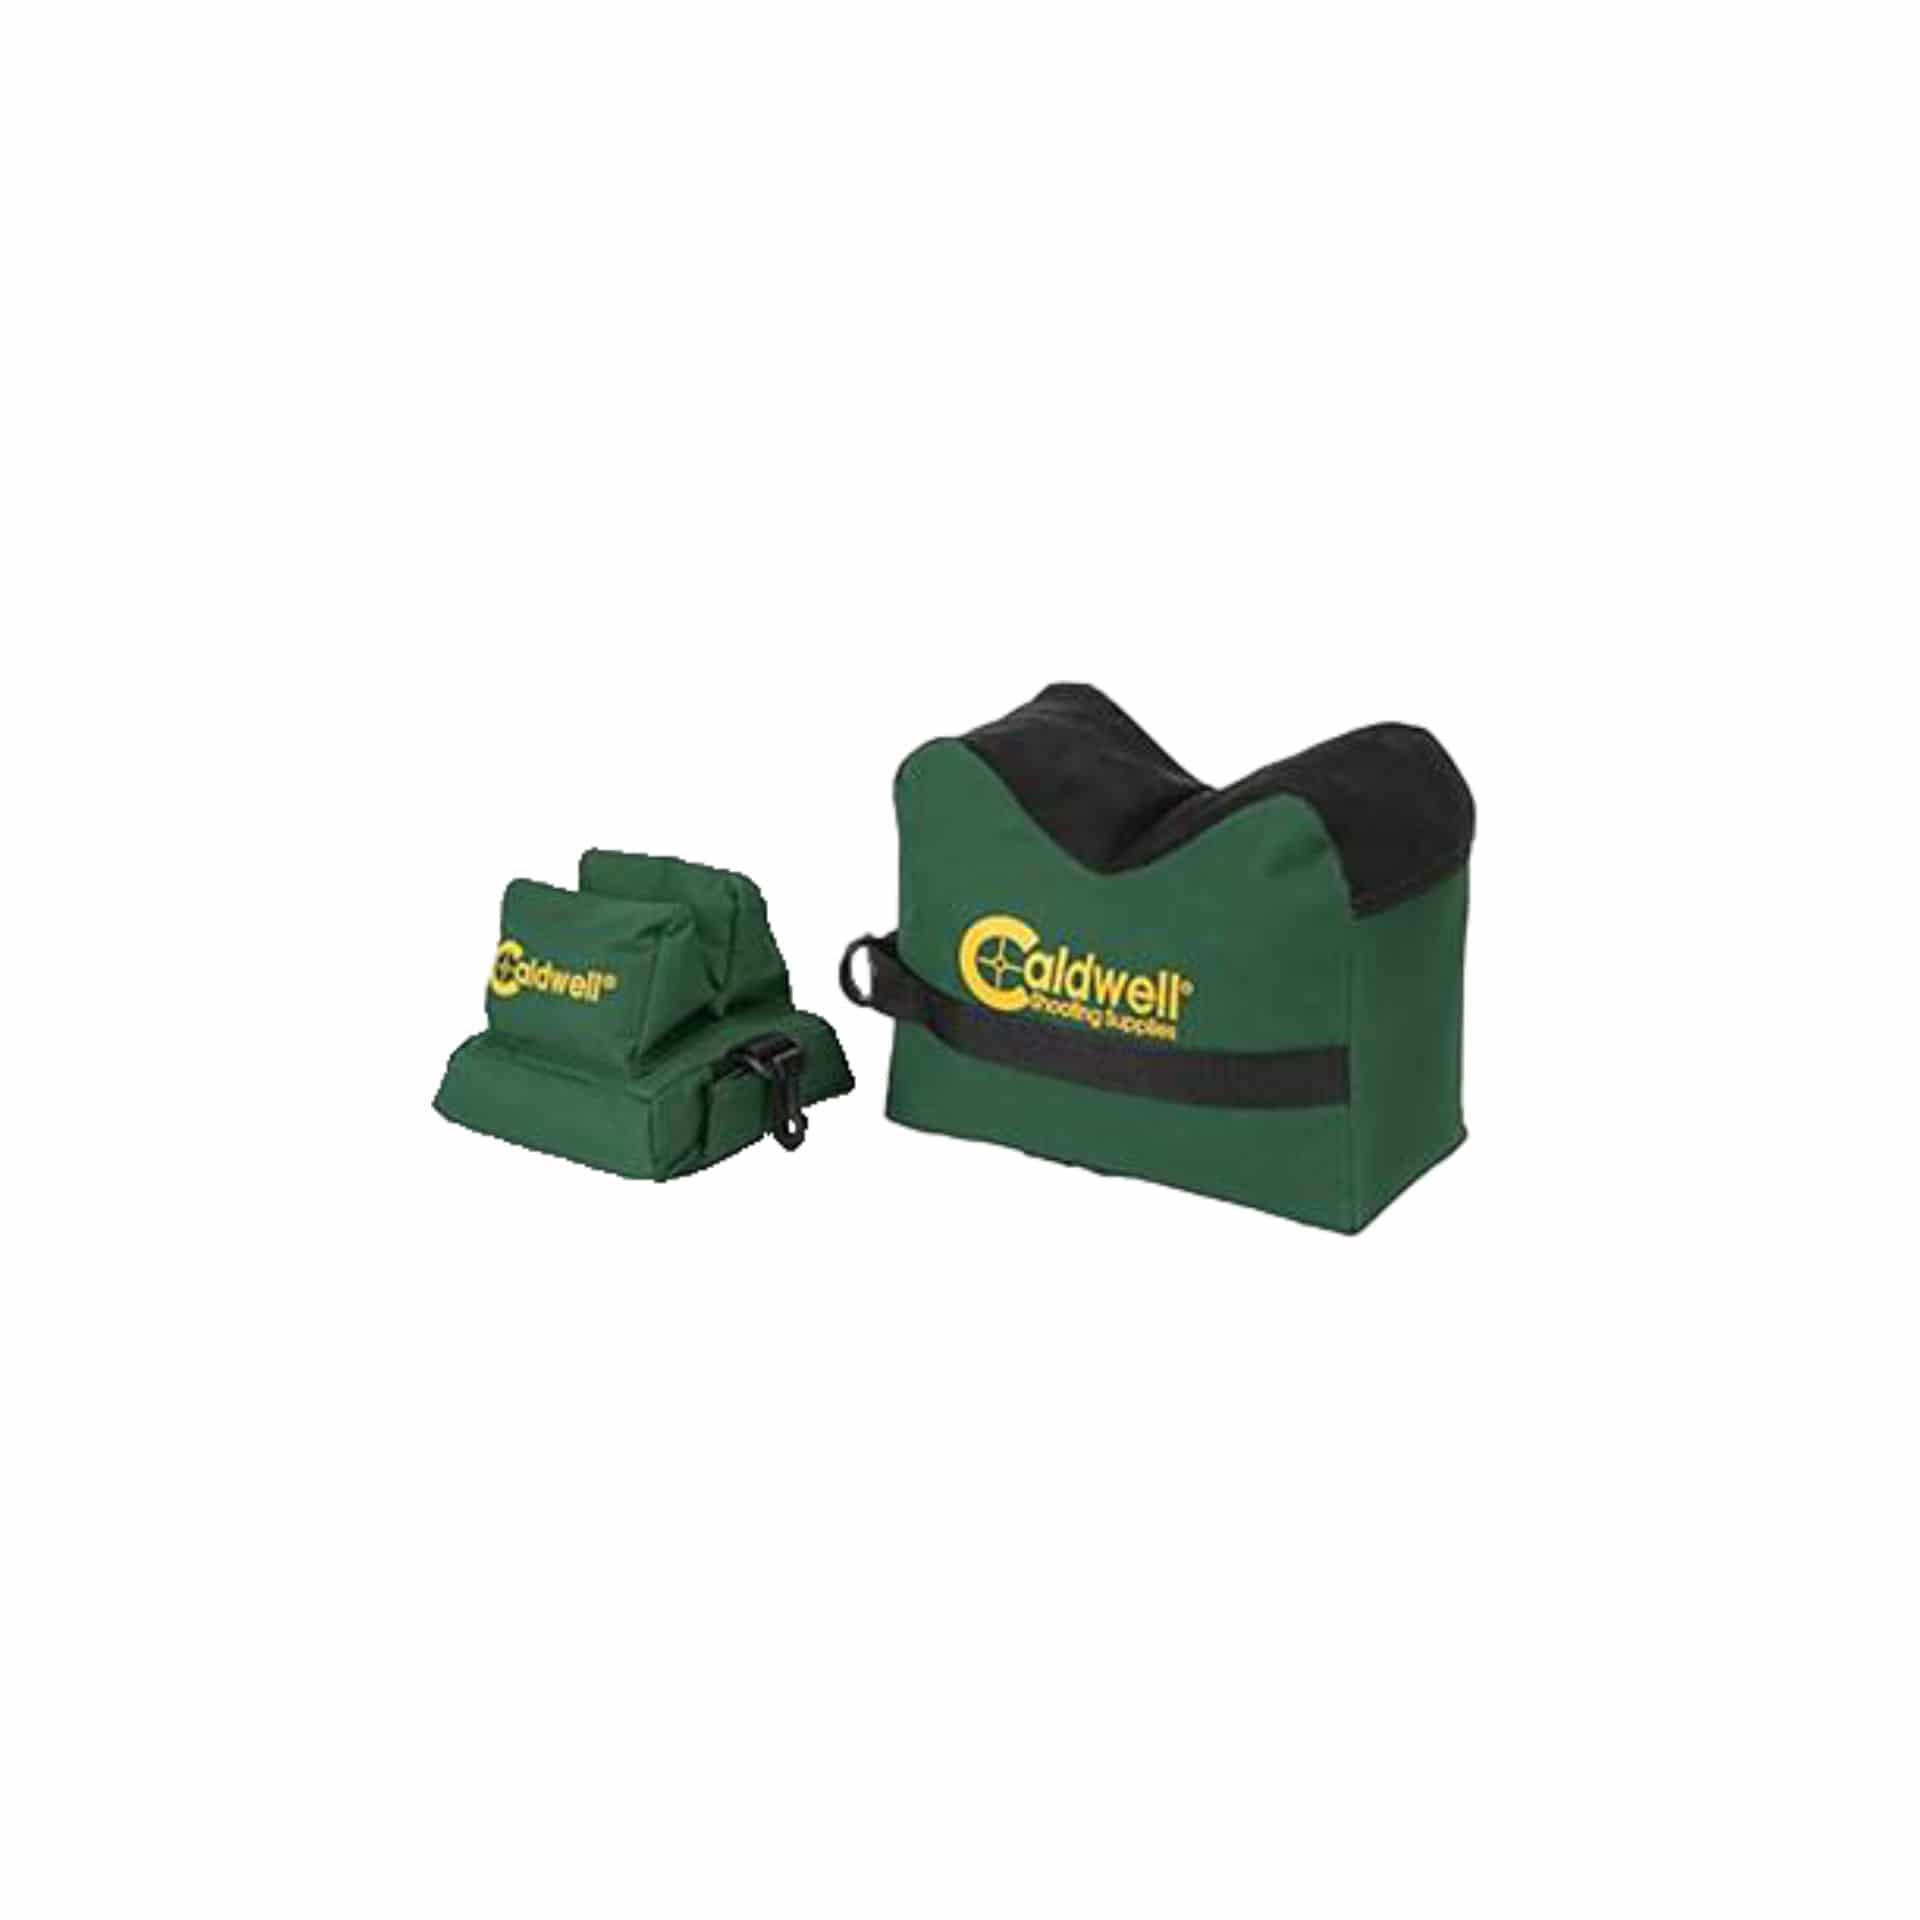 Caldwell DeadShot Shootingbags, Set of 2 (filled)